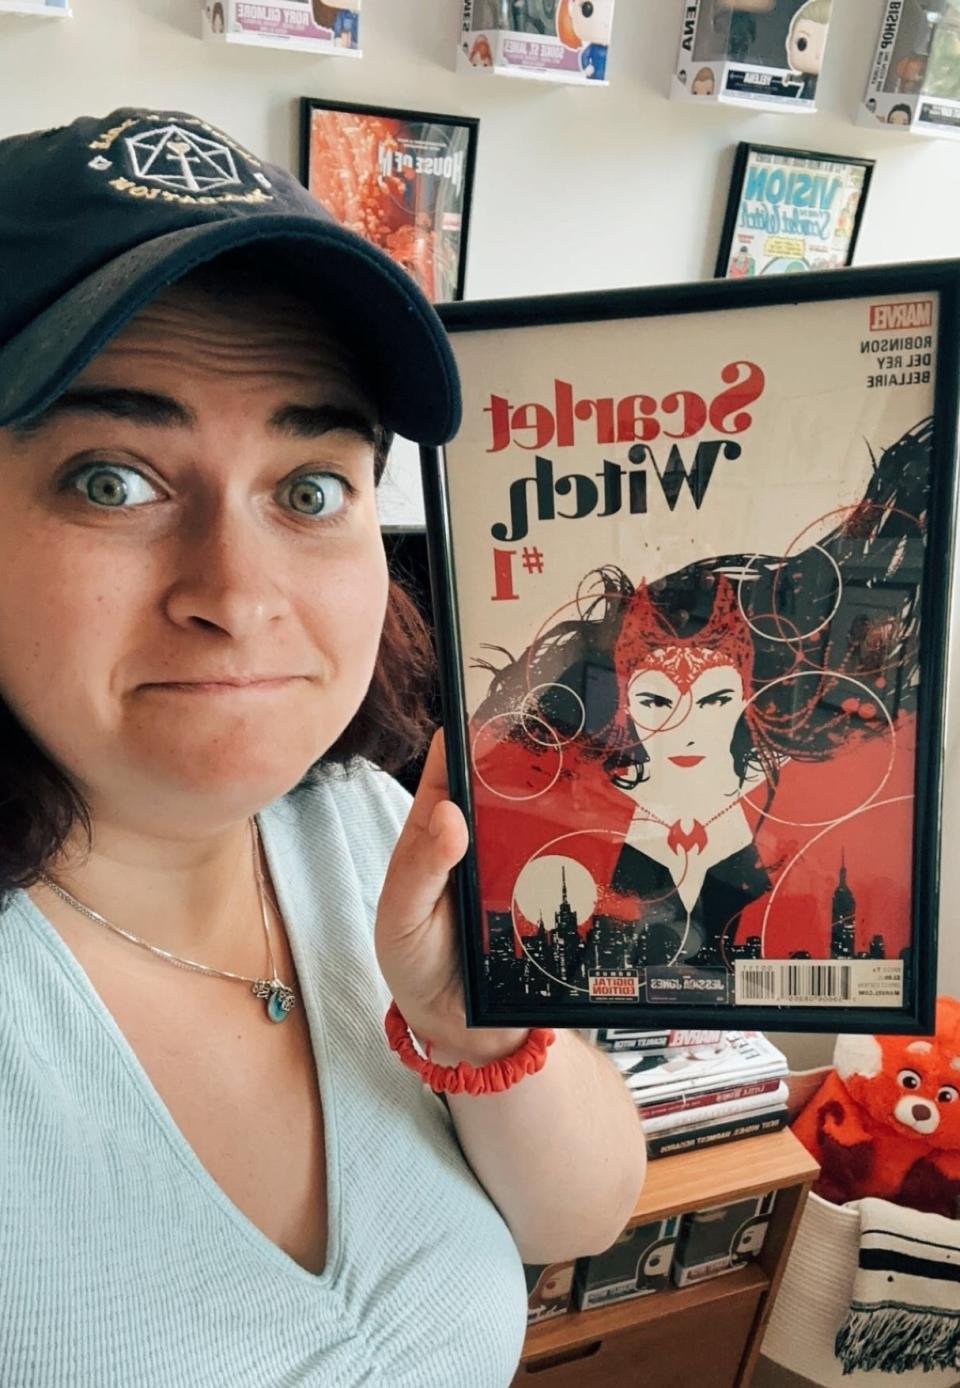 Nora, wearing a cap, holds up a framed Scarlet Witch comic book